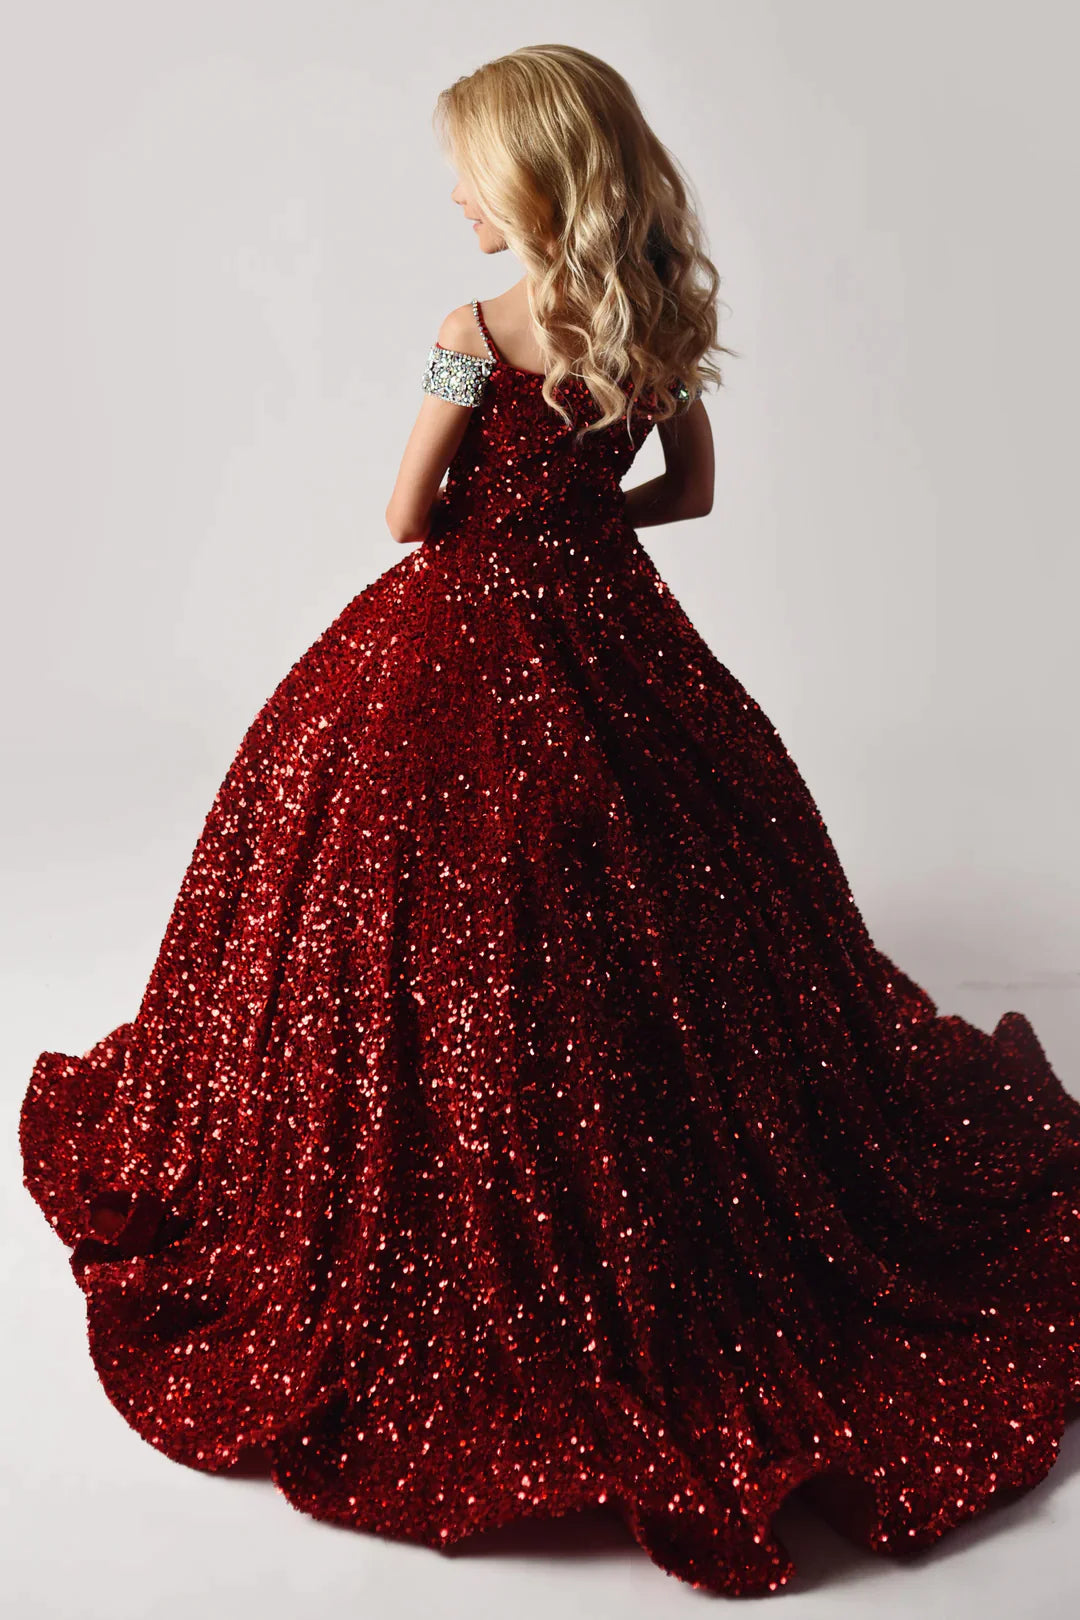 Ava Presley 27733 delivers a timeless look with its long velvet sequin ballgown. Crafted with an off-the-shoulder silhouette and beautiful crystal straps, this piece is sure to make her stand out. 100% polyester construction guarantees long-lasting wear.  Sizes: 2-16  Colors: Red, Royal, Iridescent White, Iridescent Pink, Iridescent Light Blue